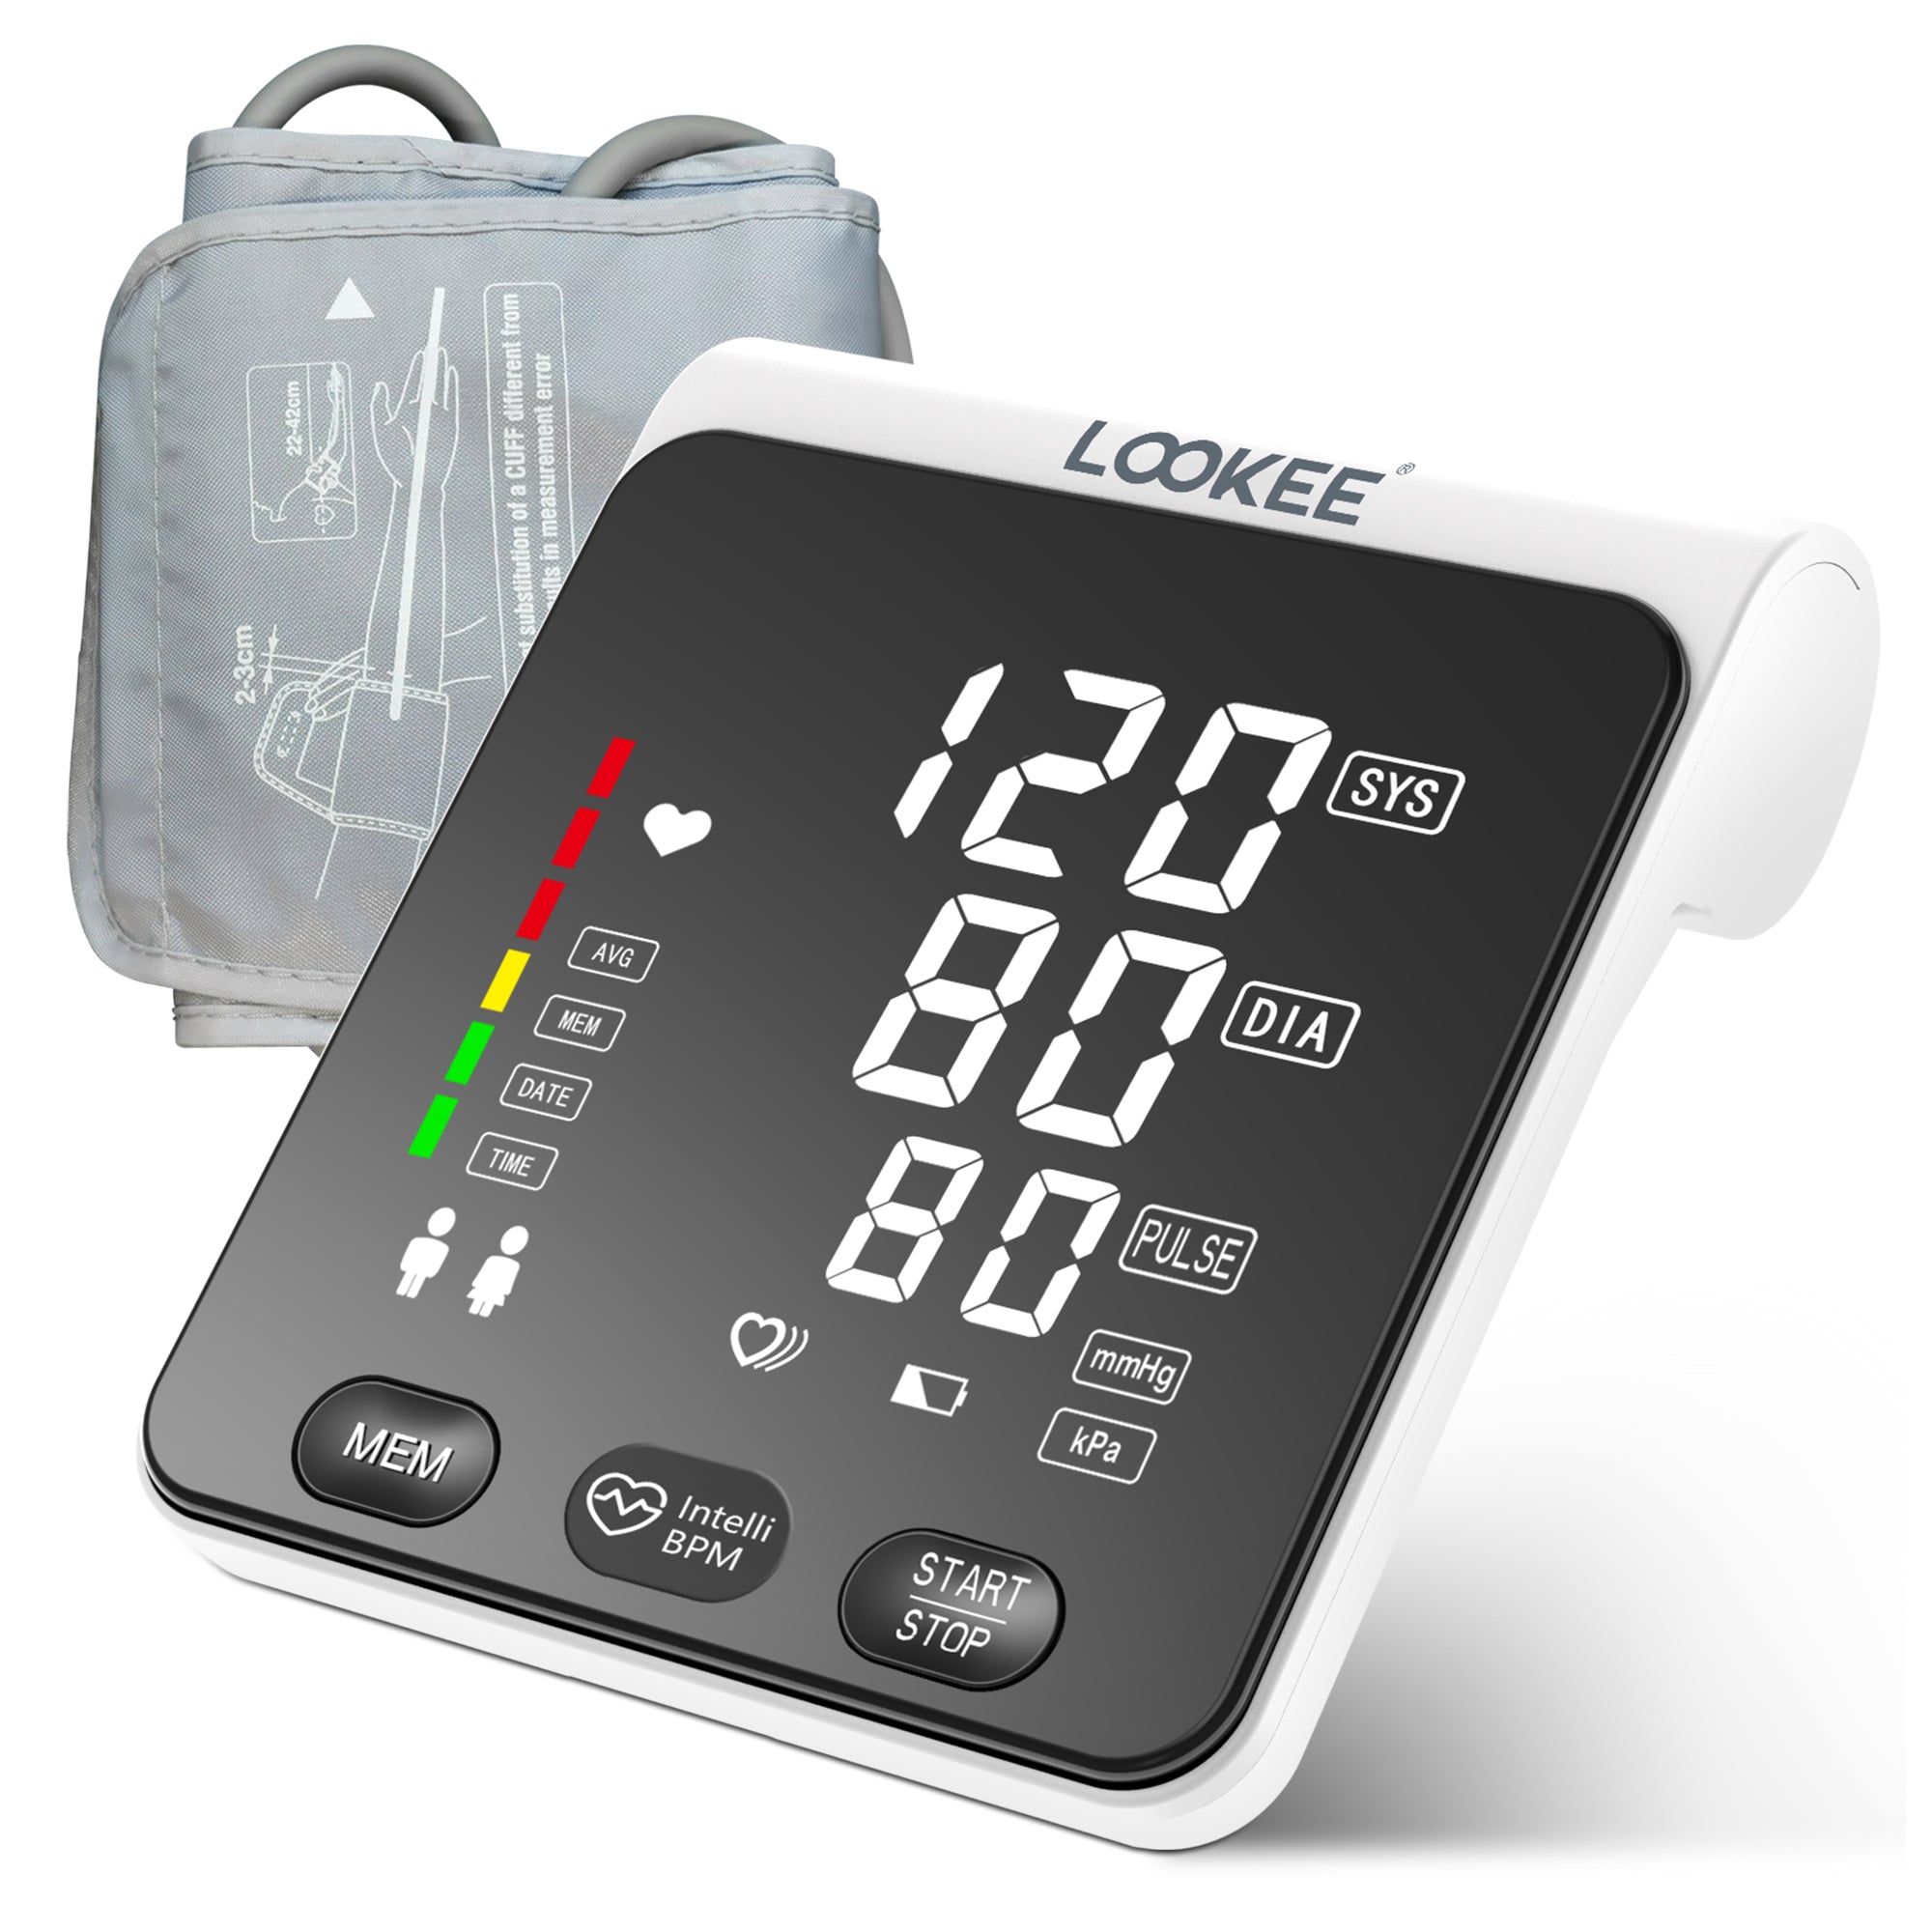 Automatic Wrist Blood Pressure Monitor: Easy@Home Bluetooth Smart Larg